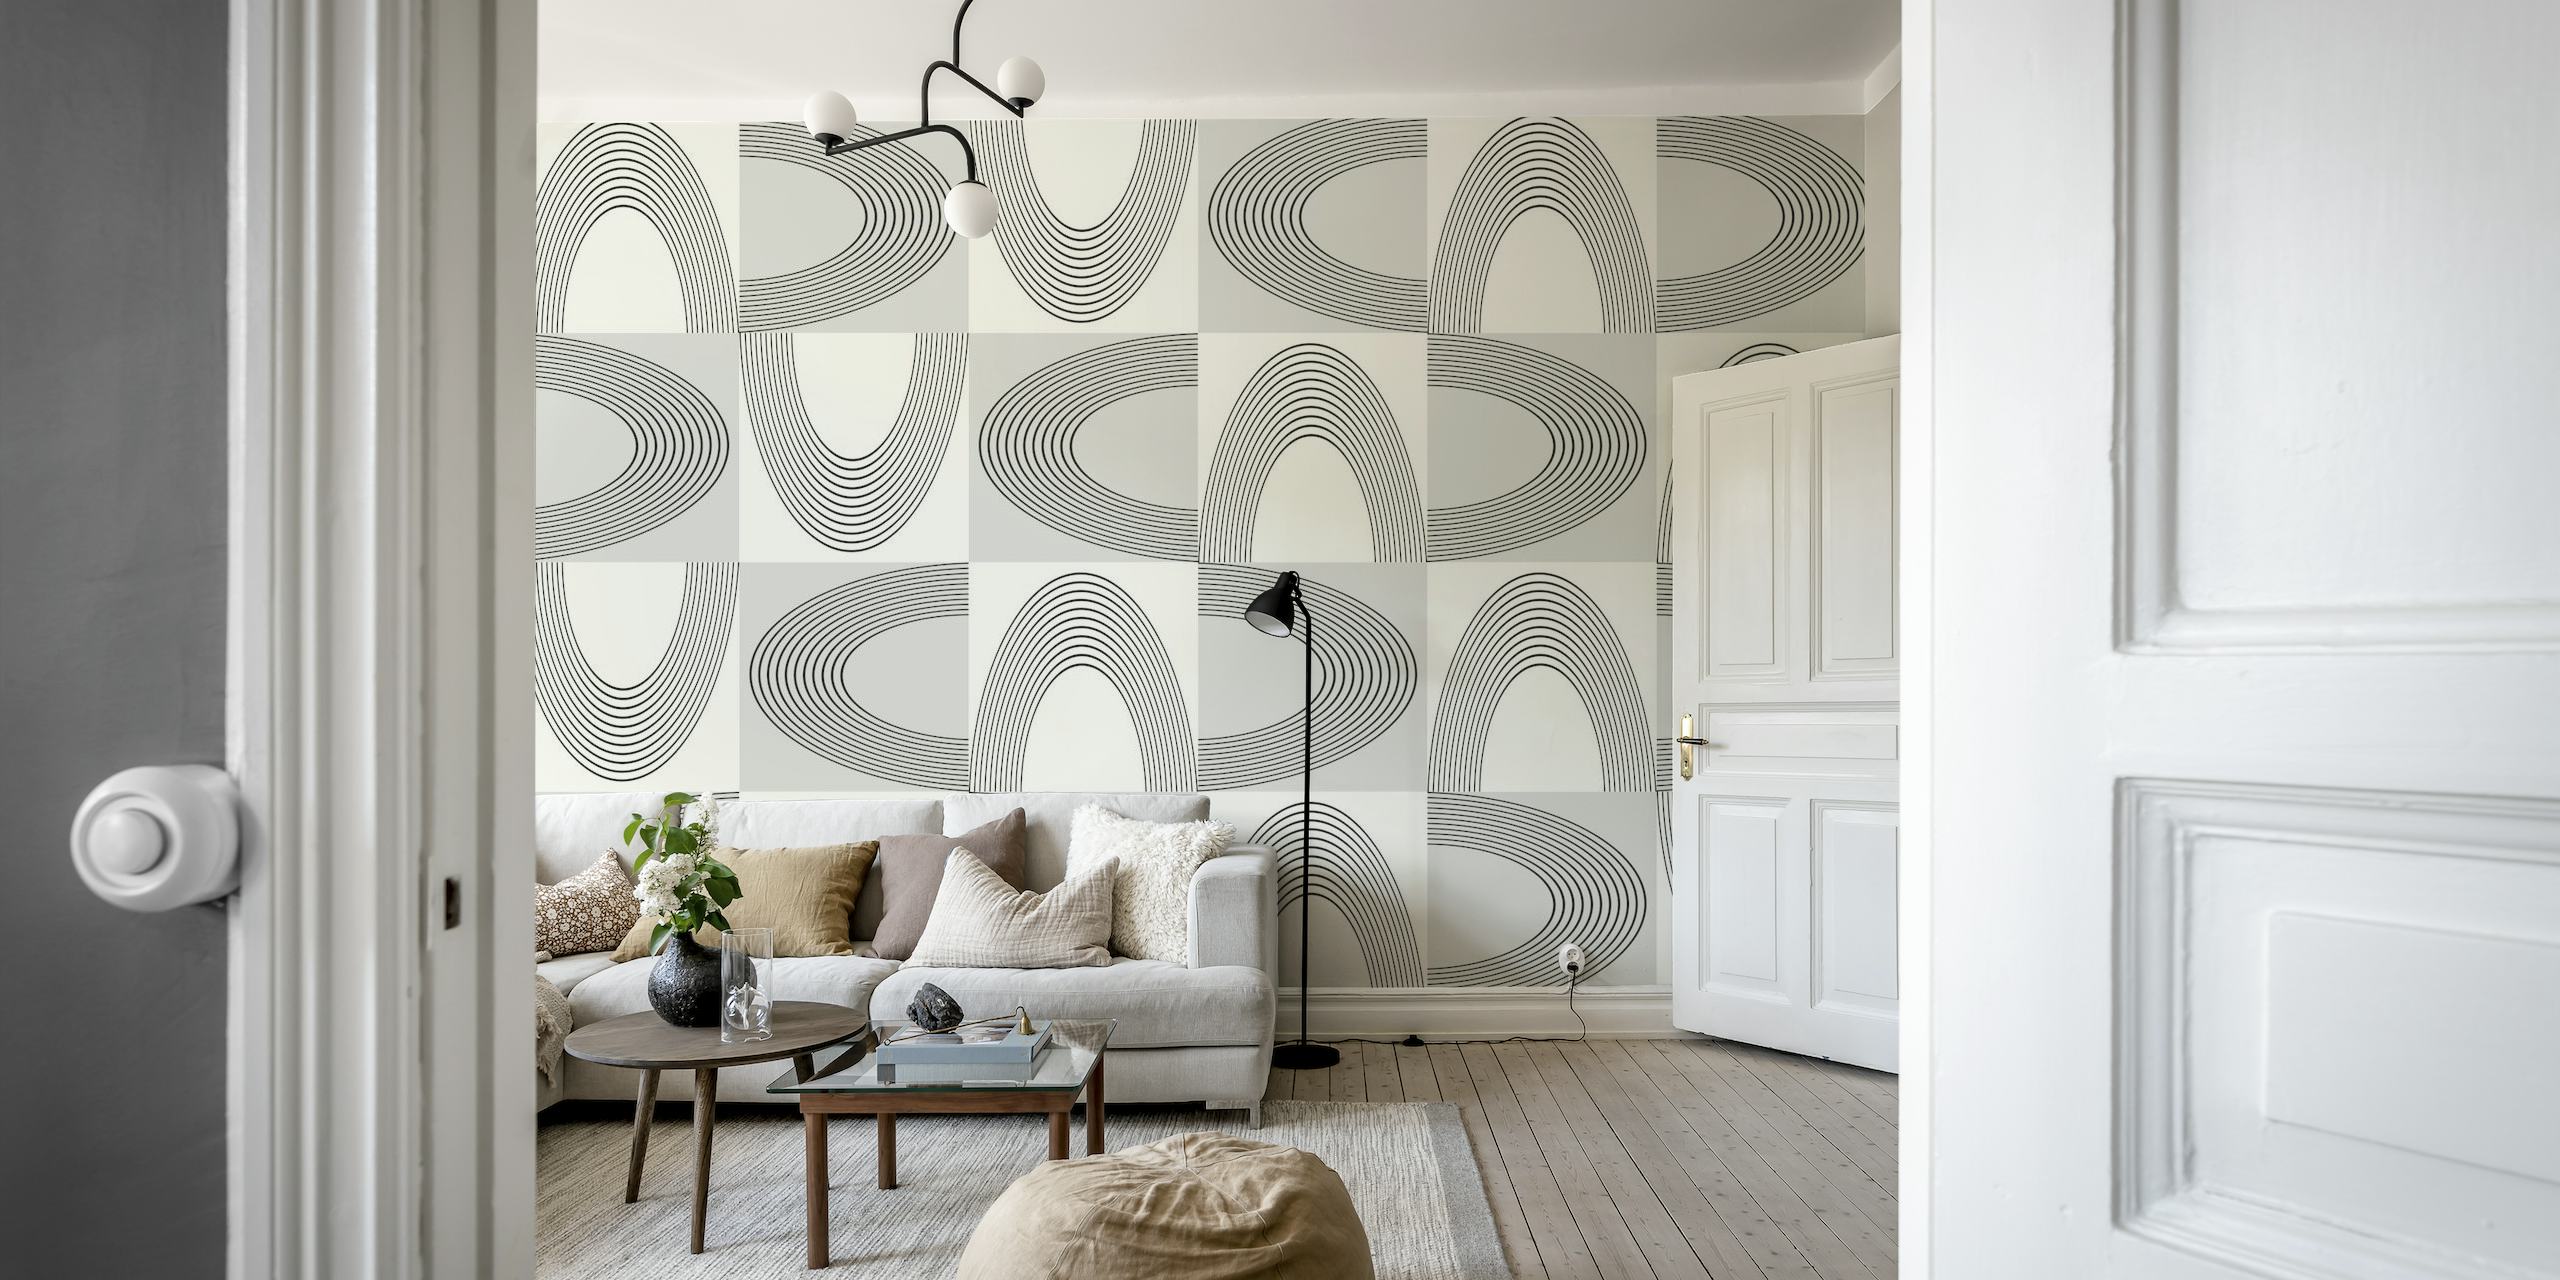 Vintage abstract geometric wall mural with interlocking shapes in gray and off-white